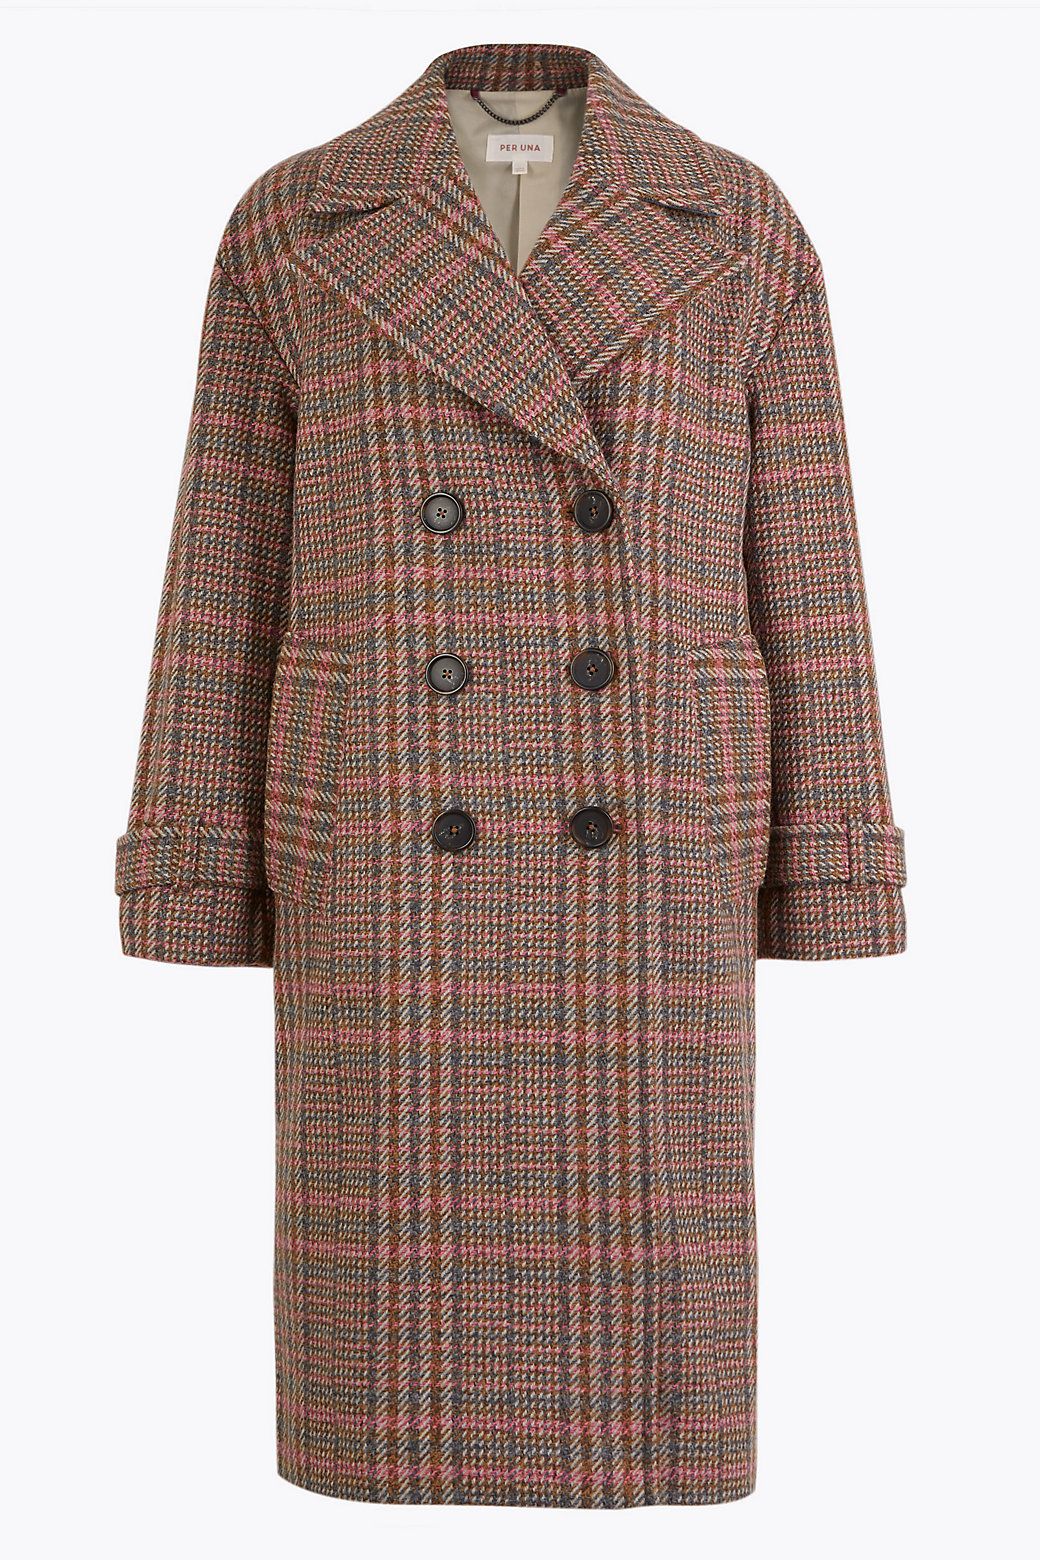 Marks & Spencer checked coat - M&S selling on-trend checked coat